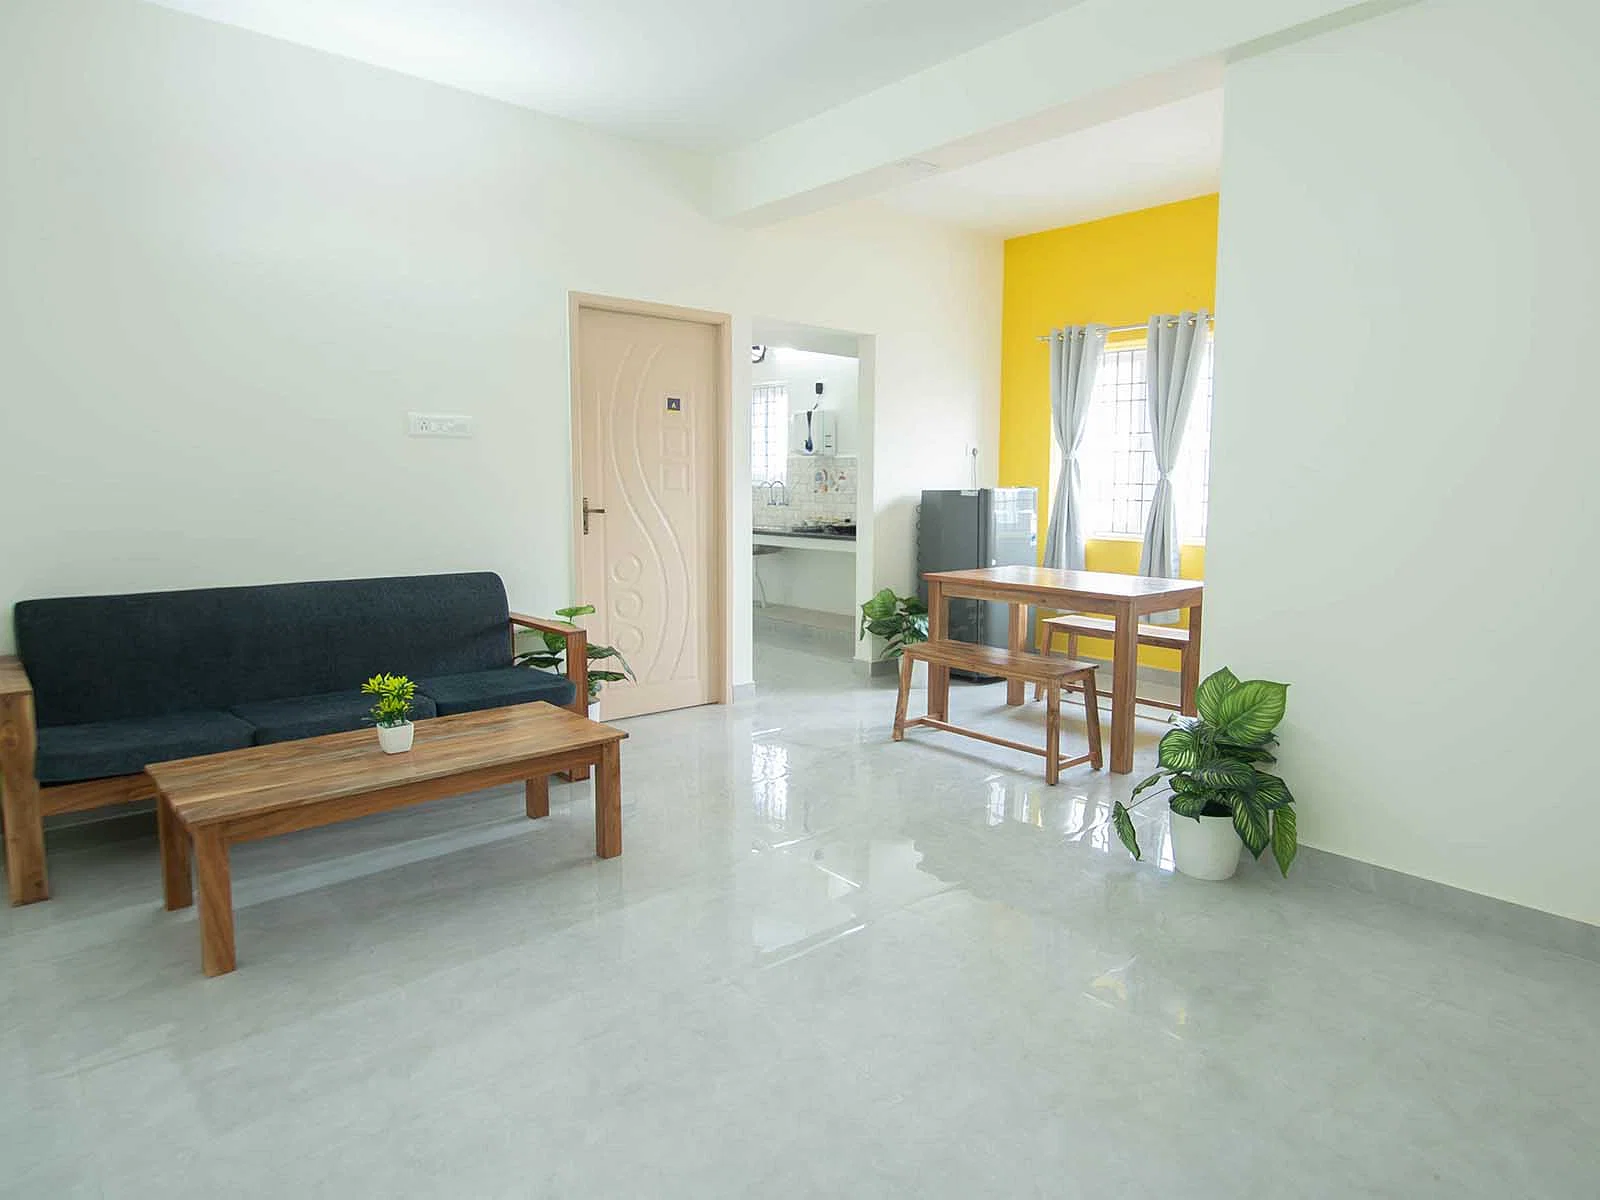 Affordable single rooms for students and working professionals in Keelkattalai-Chennai-Zolo Nexus